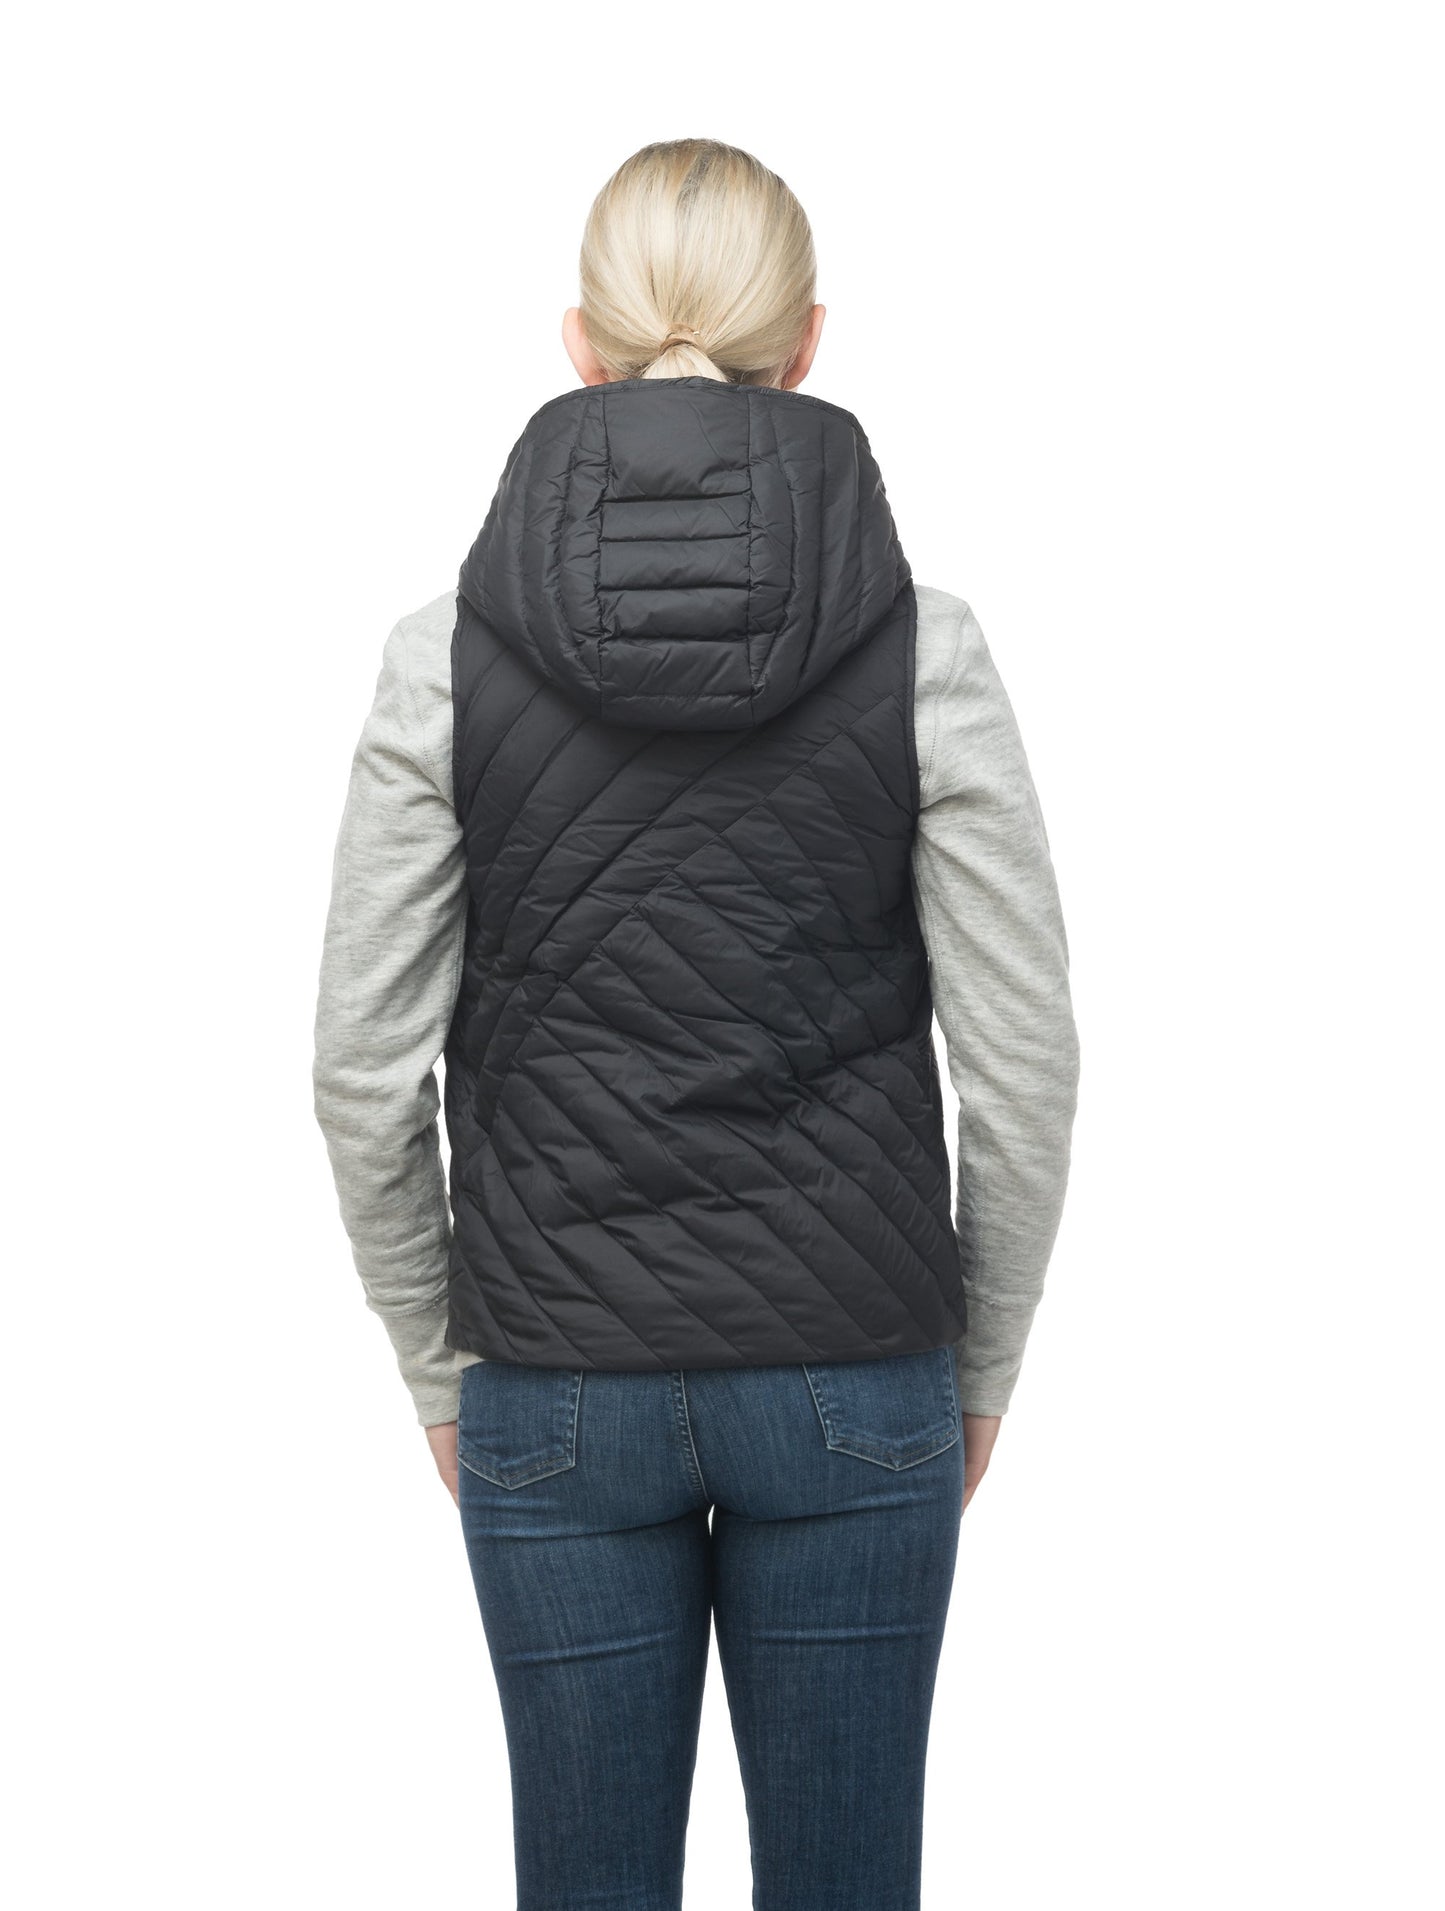 Women's down filled vest with diagonal quilting pattern throughout in Black